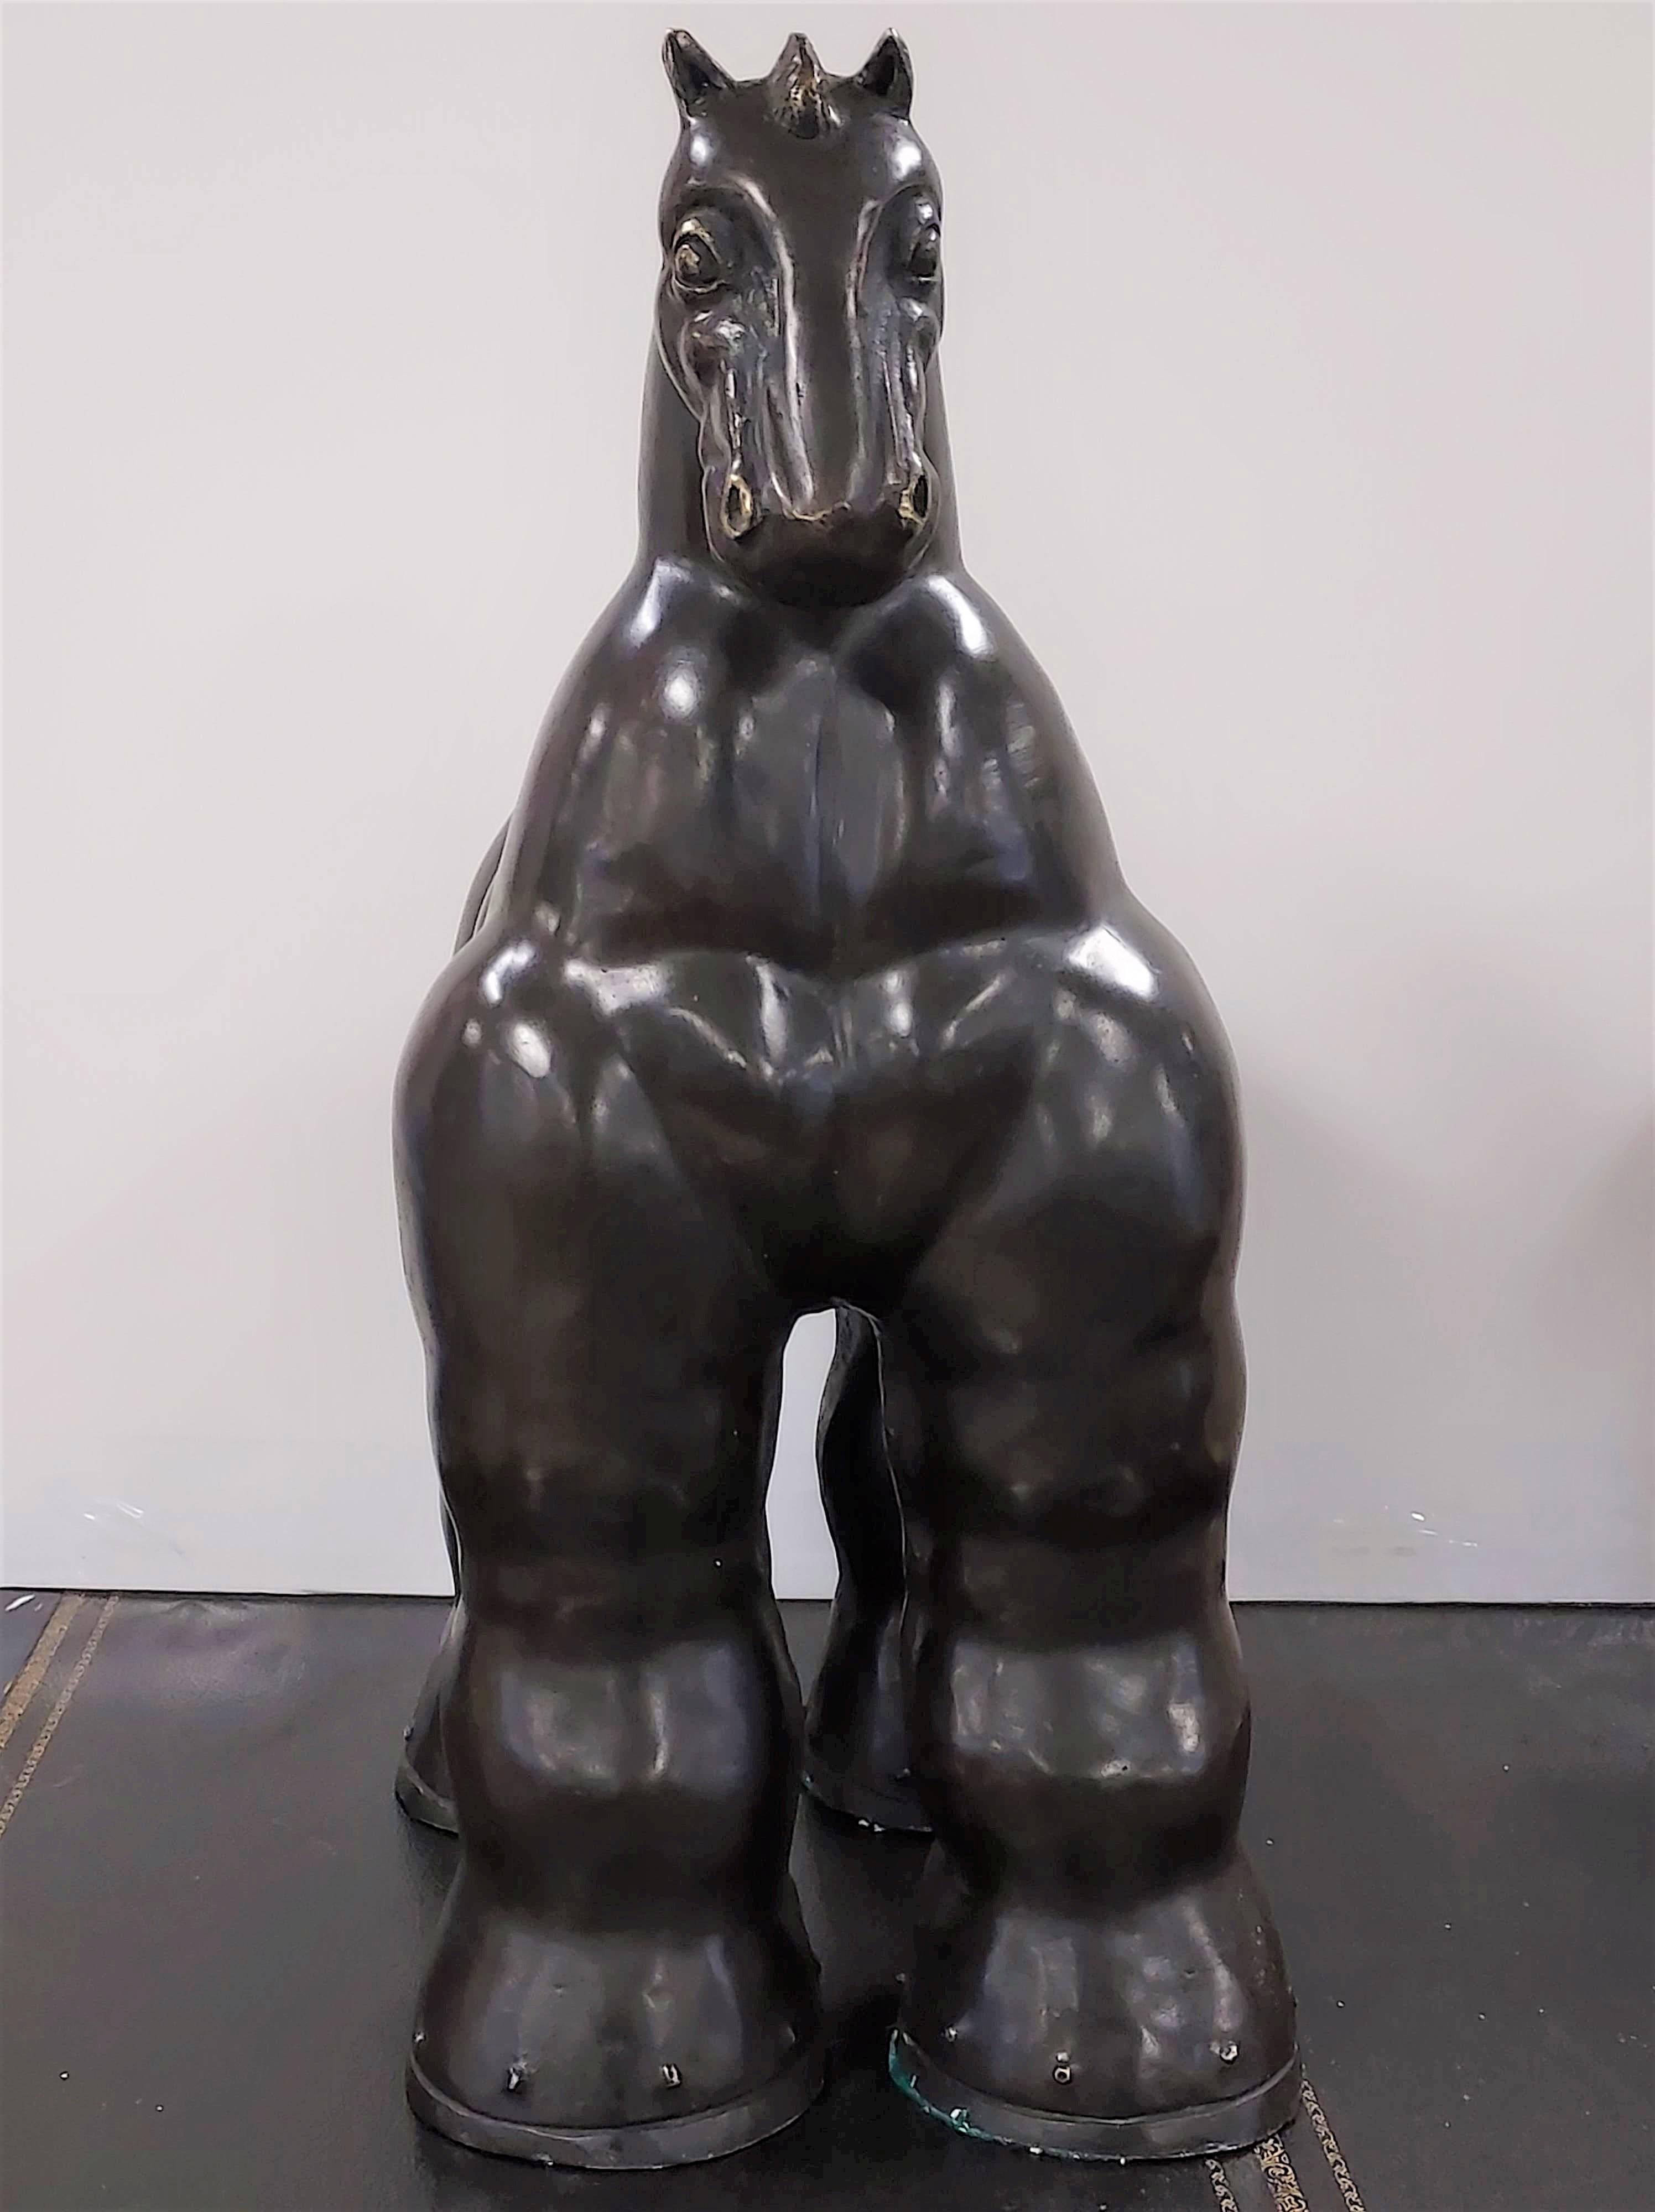 The Big Horse by Botero  - Sculpture by Fernando Botero